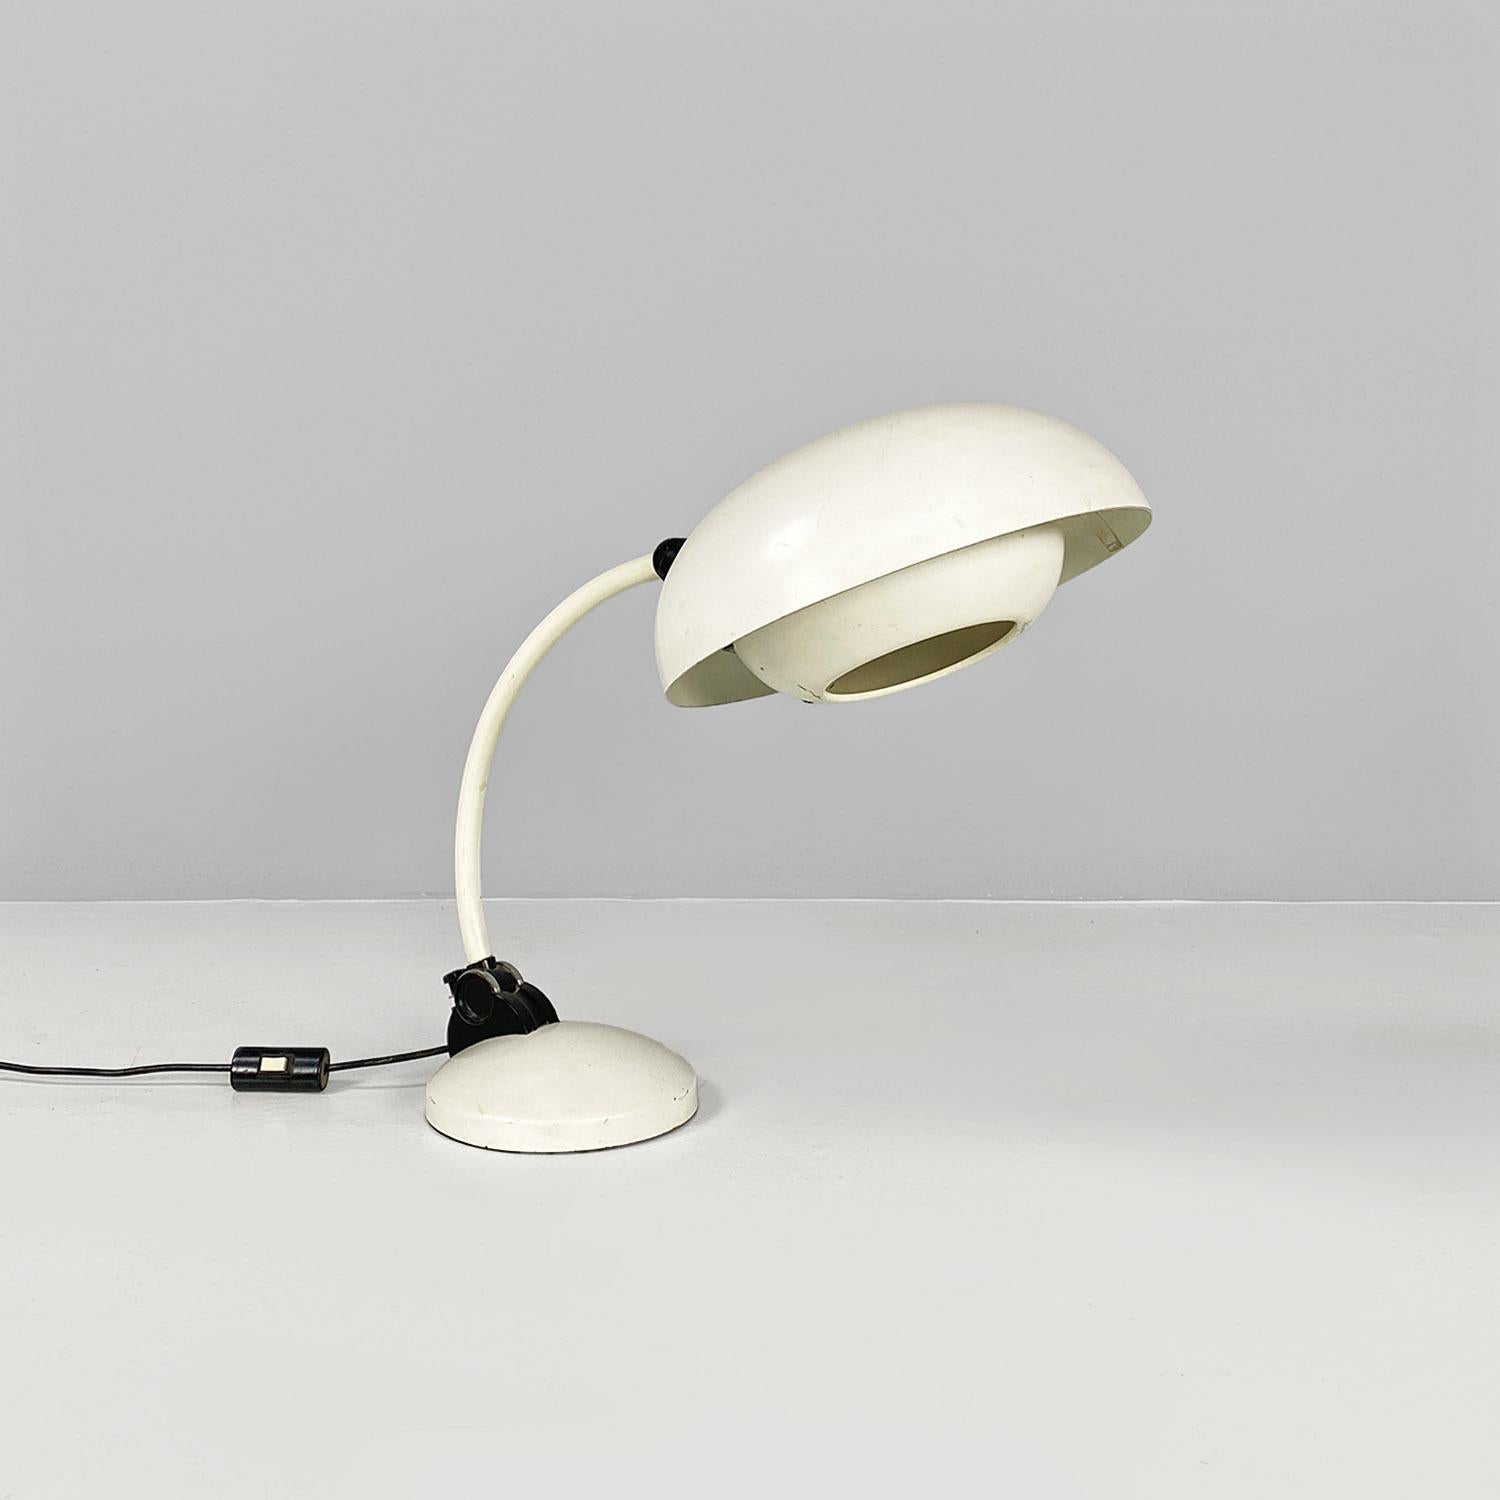 Adjustable table or desk lamp with a round base and curved arm made of white metal, with black joints and a metal diffuser with a double cap, thus creating two levels of light.
1970 ca.
Good overall condition, few signs of time.
Measurements in cm